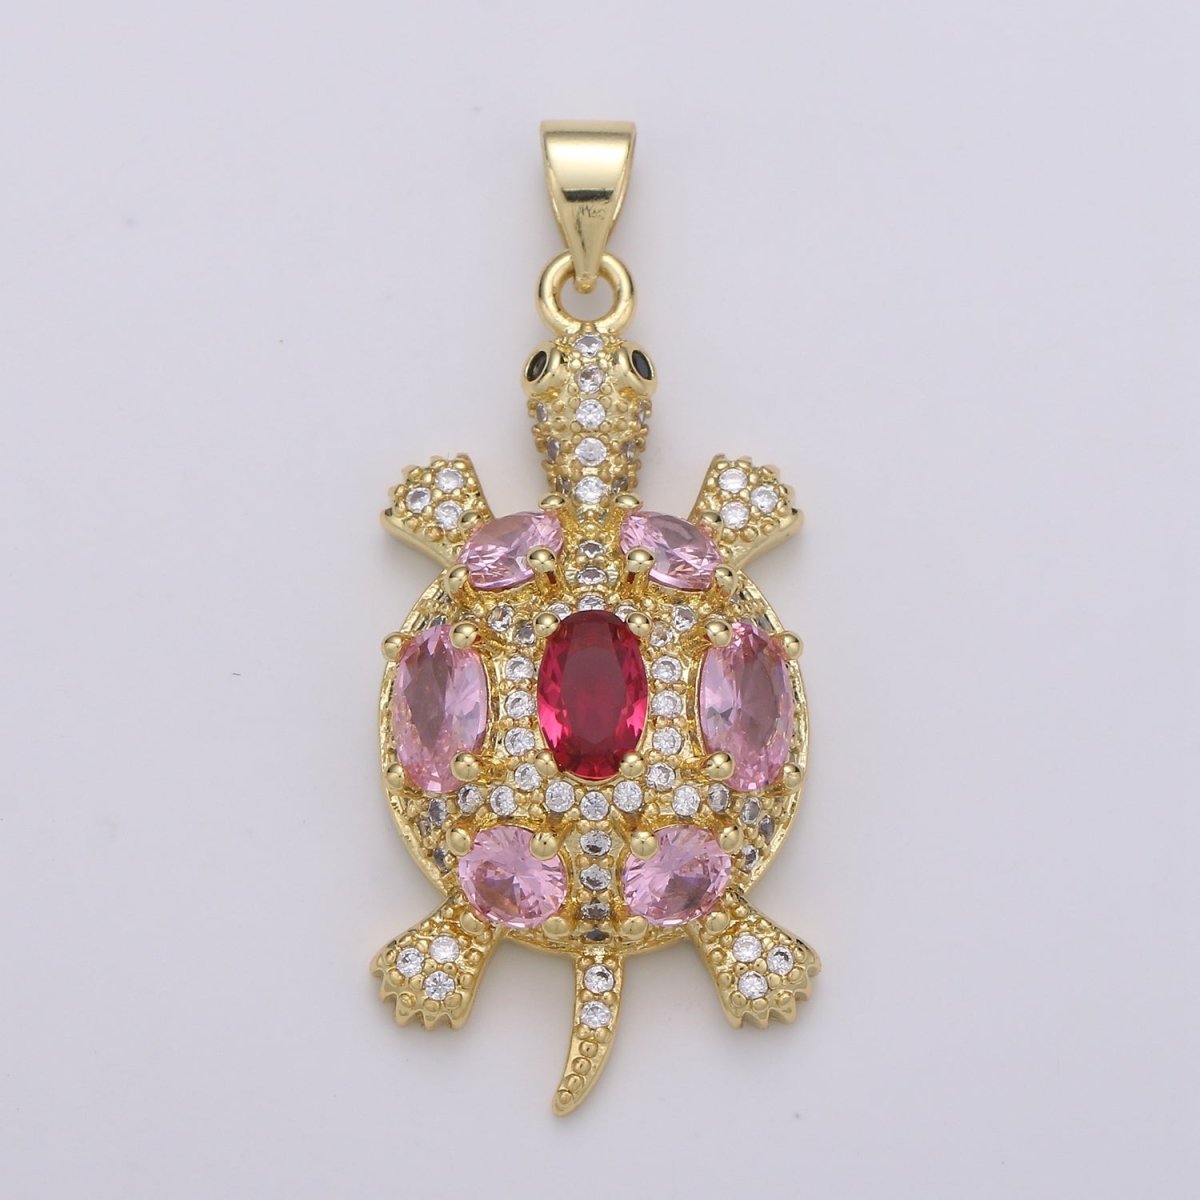 37x16mm Wholesale 24K Gold Plated Turtle Pendant with Pink and Red Rhinestone Crystals, Pendant for Necklace Bracelet Anklet Making J-221 - DLUXCA